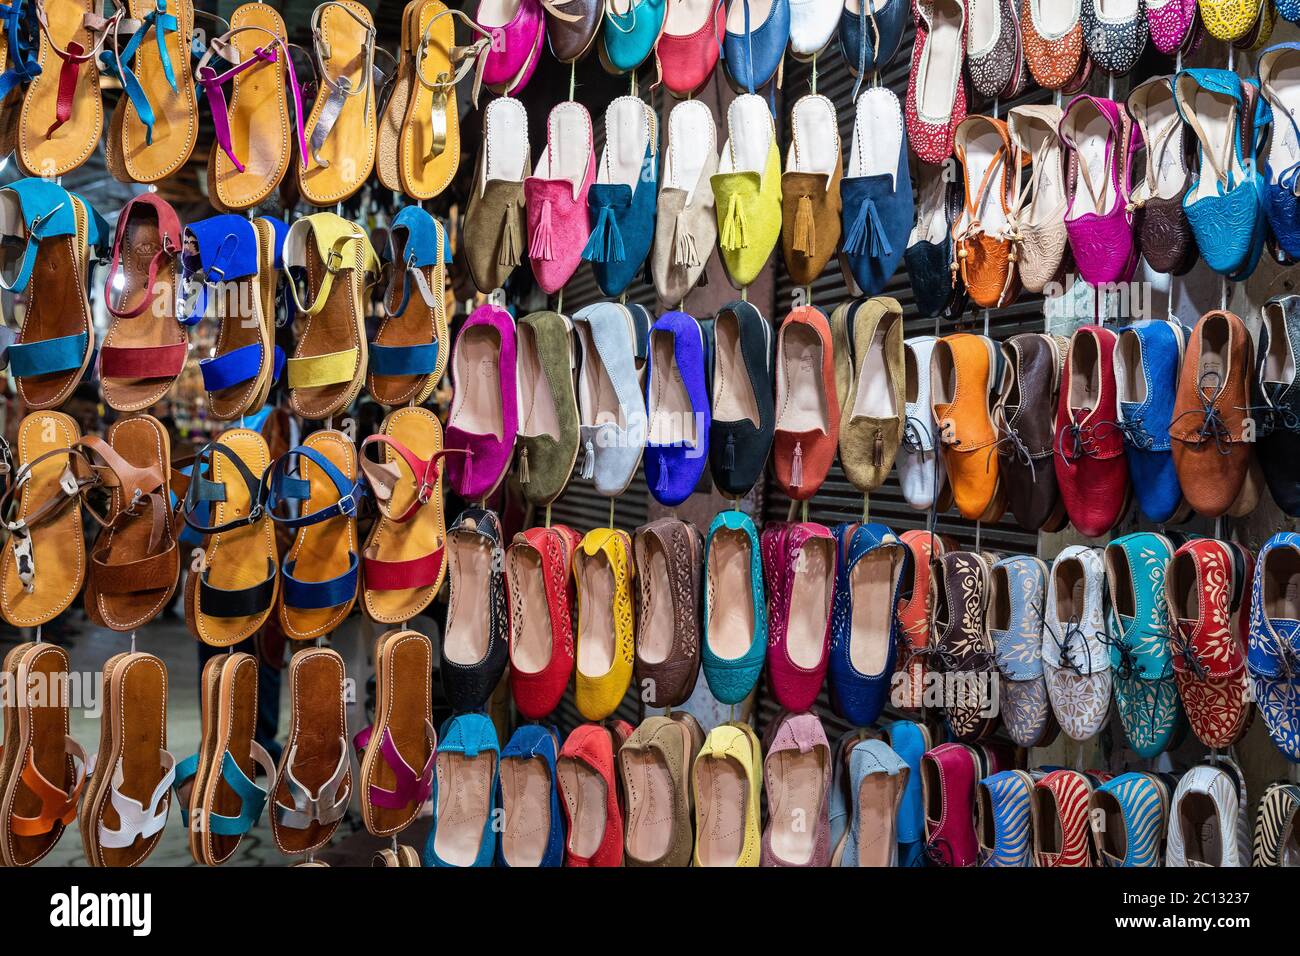 MOROCCO MARRAKECH JEMAA EL FNA MEDINA SOUK ASSORTMENT OF MULTICOLOURED LEATHER  SHOES, SLIPPERS OR BABOUCHE FOR SALE Stock Photo - Alamy